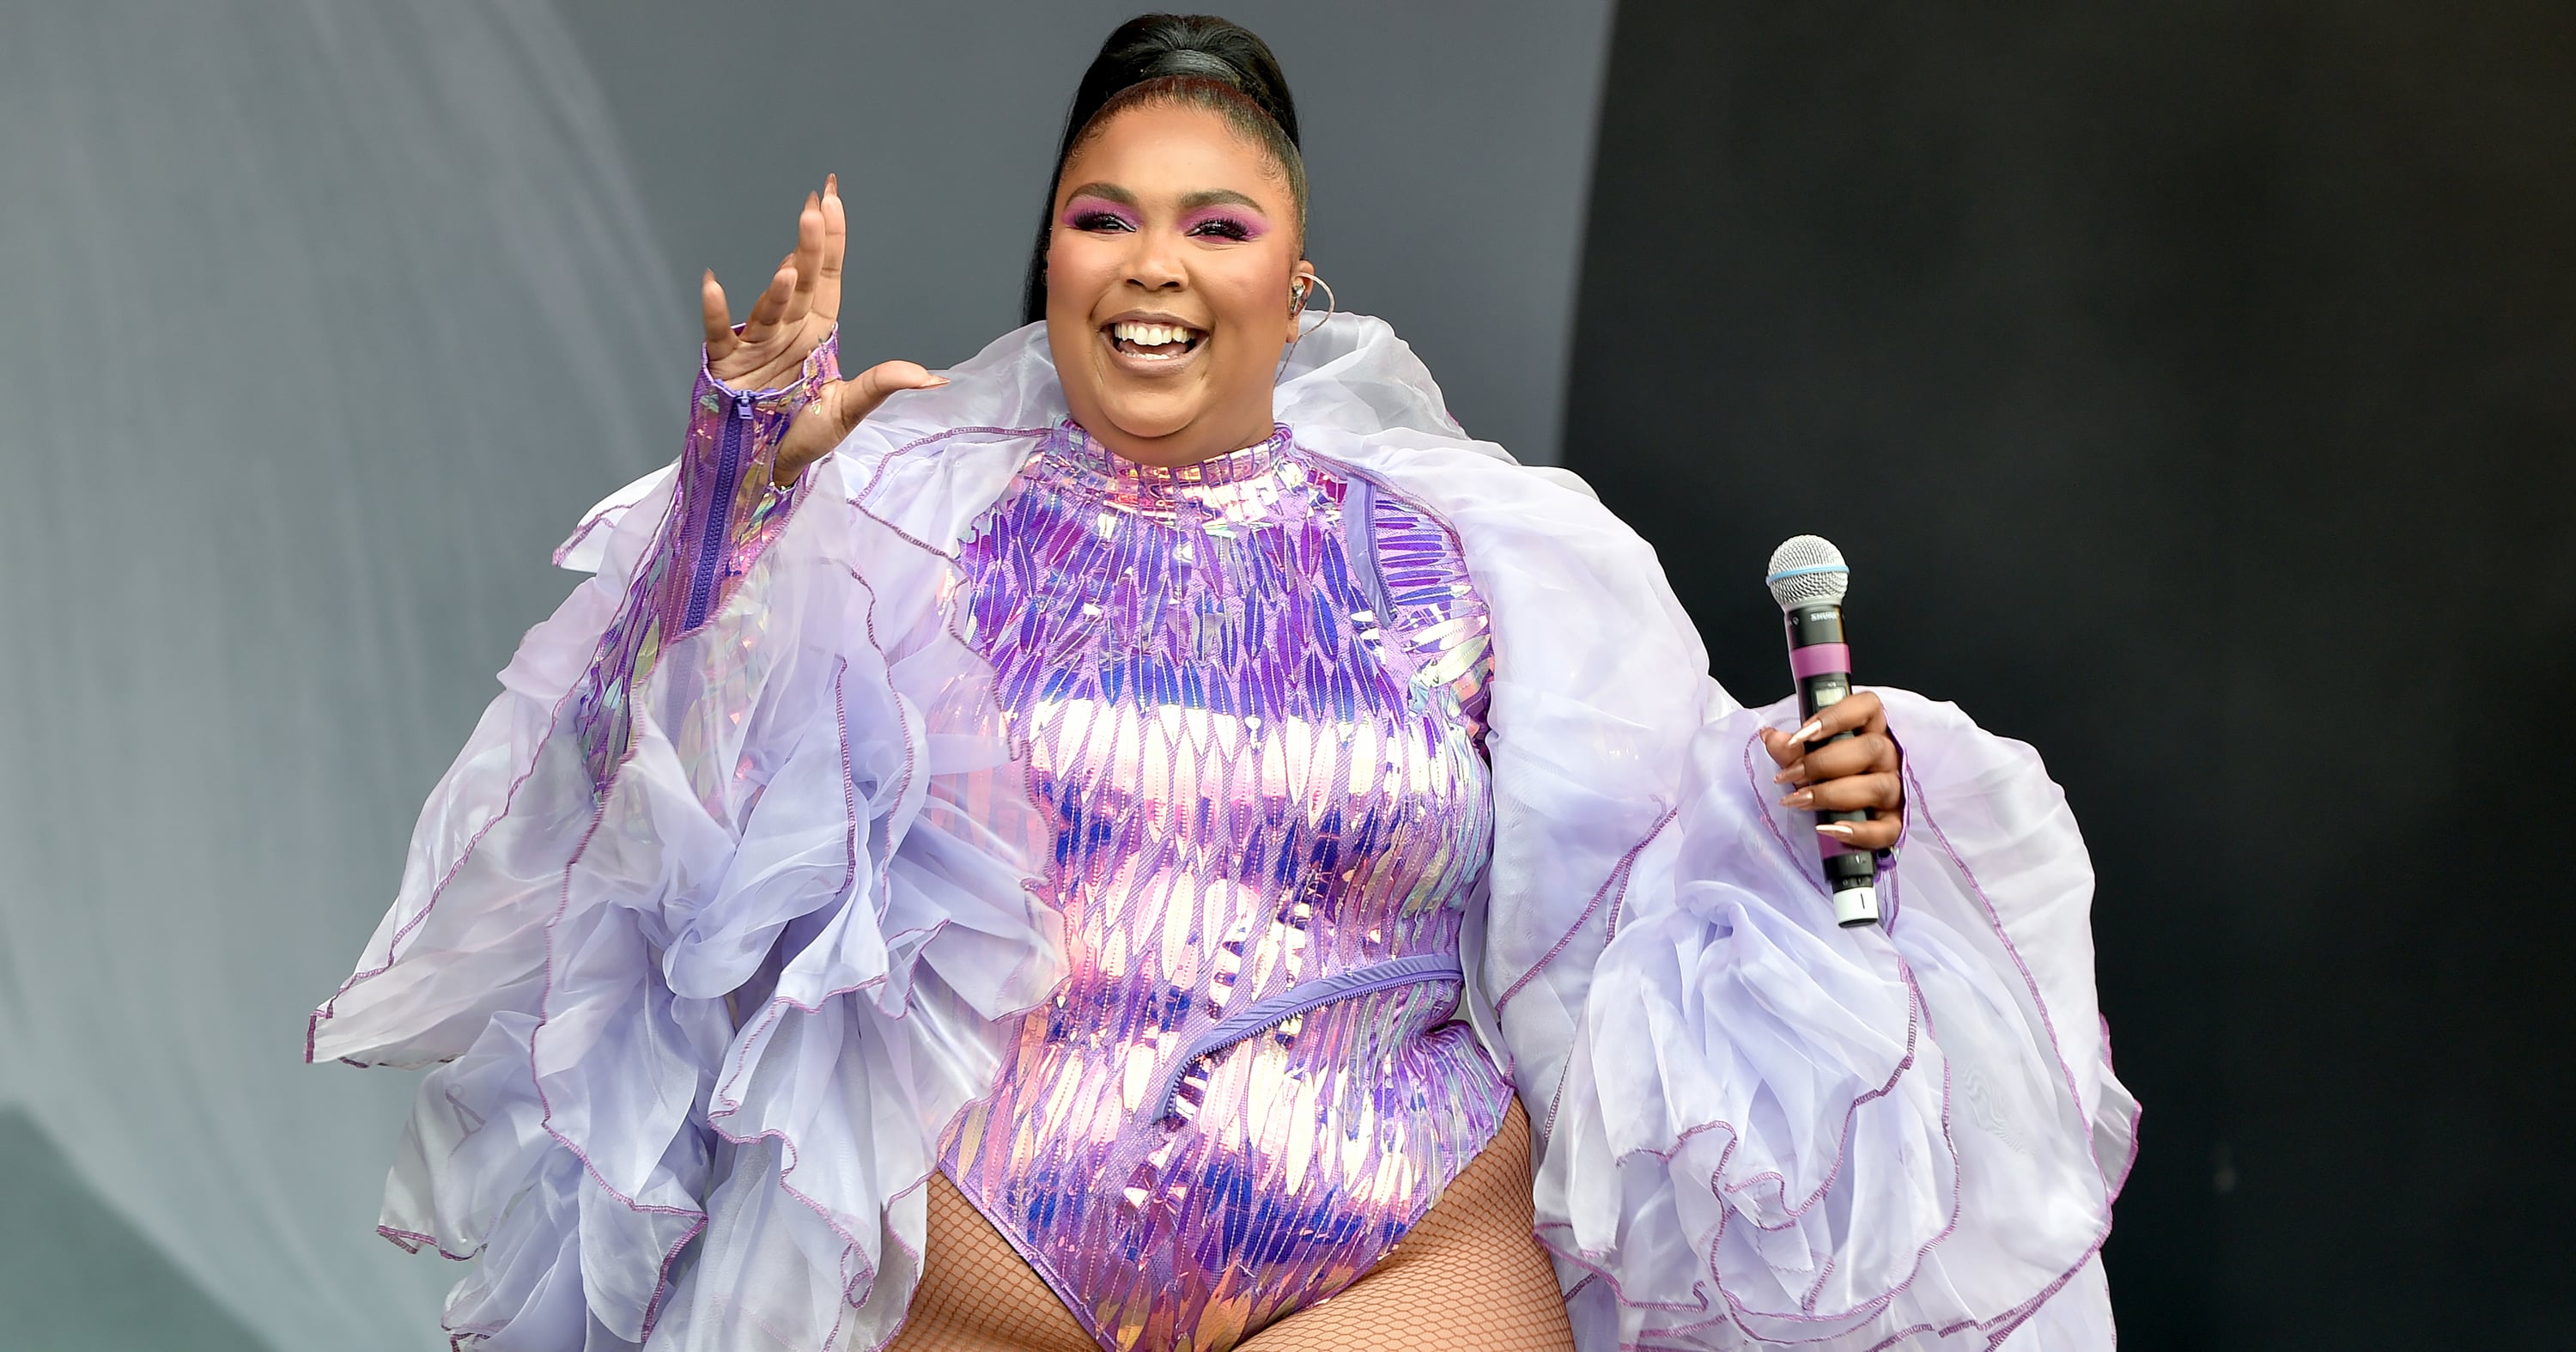 Lizzo's self-love mantras have never been anything more than branding